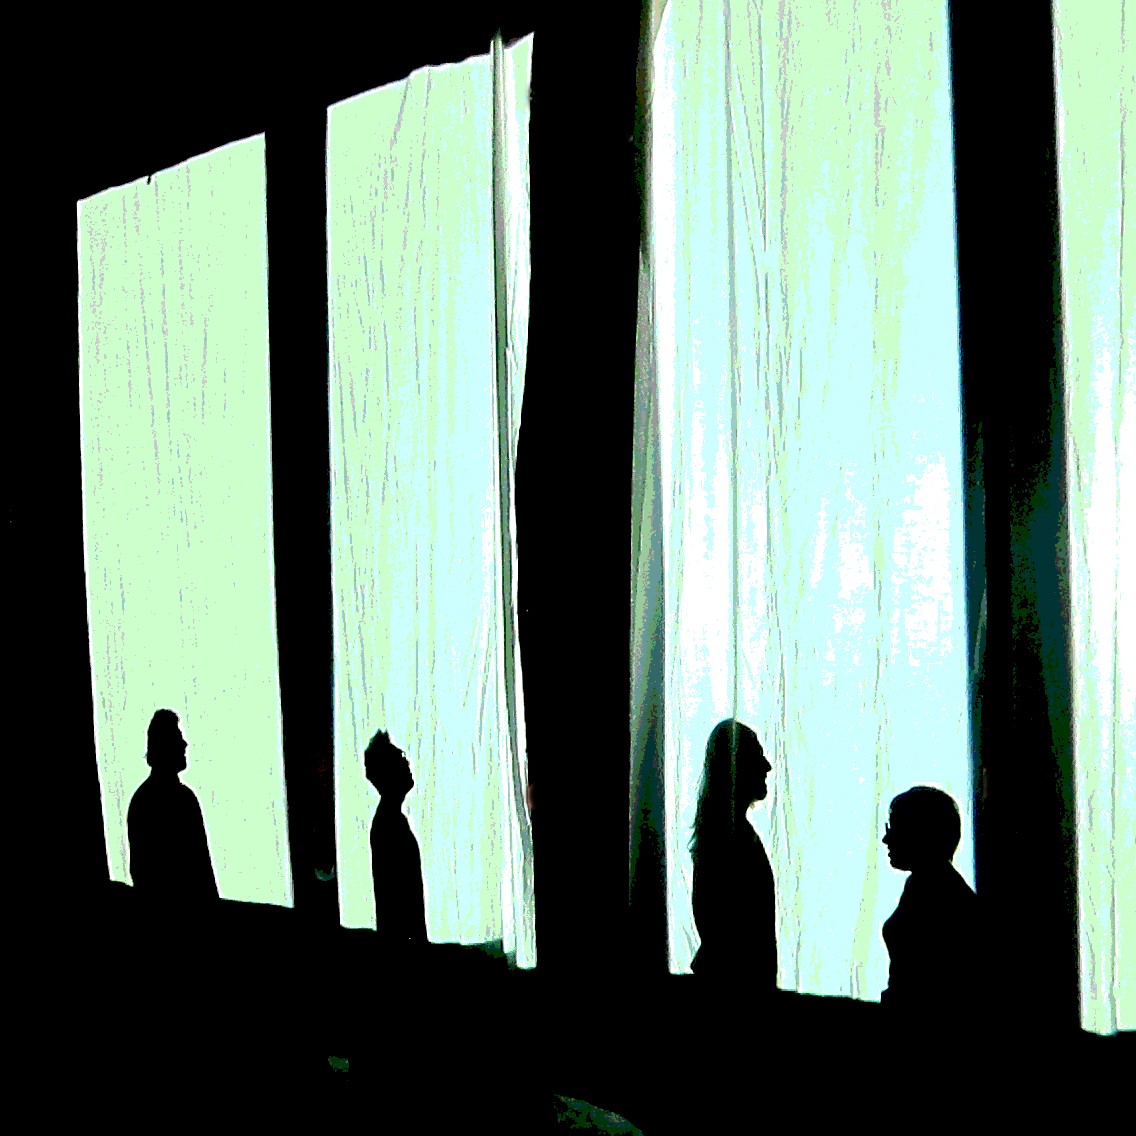 Image of people's silhouettes behind a screen